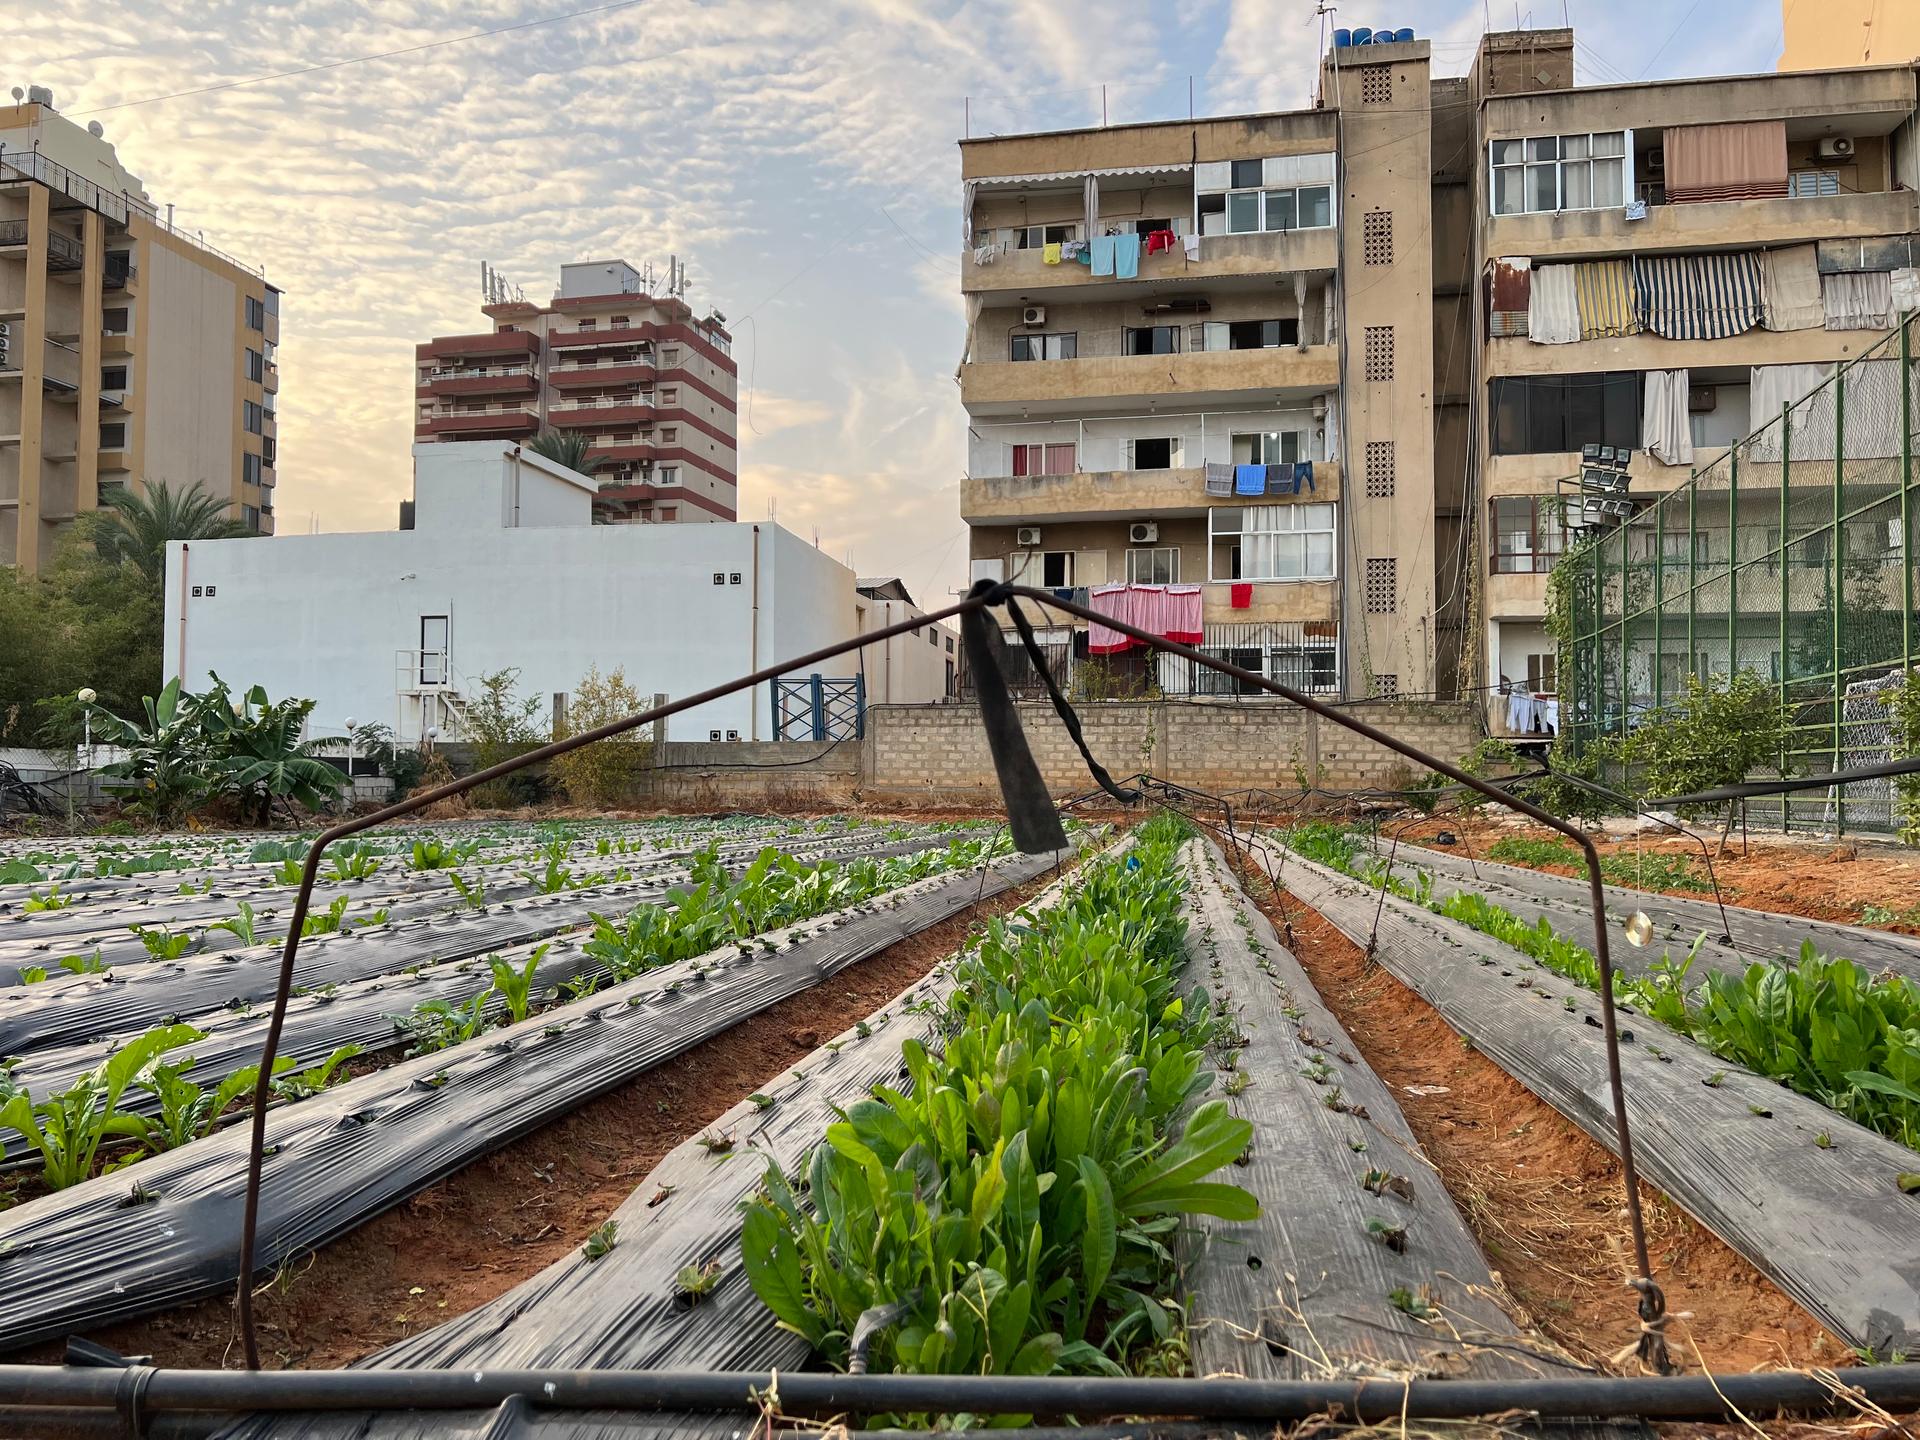 Hanna Mikhael, who is experimenting with ways to help people become more self-sufficient, showed an example of what urban farming can look like in Beirut.